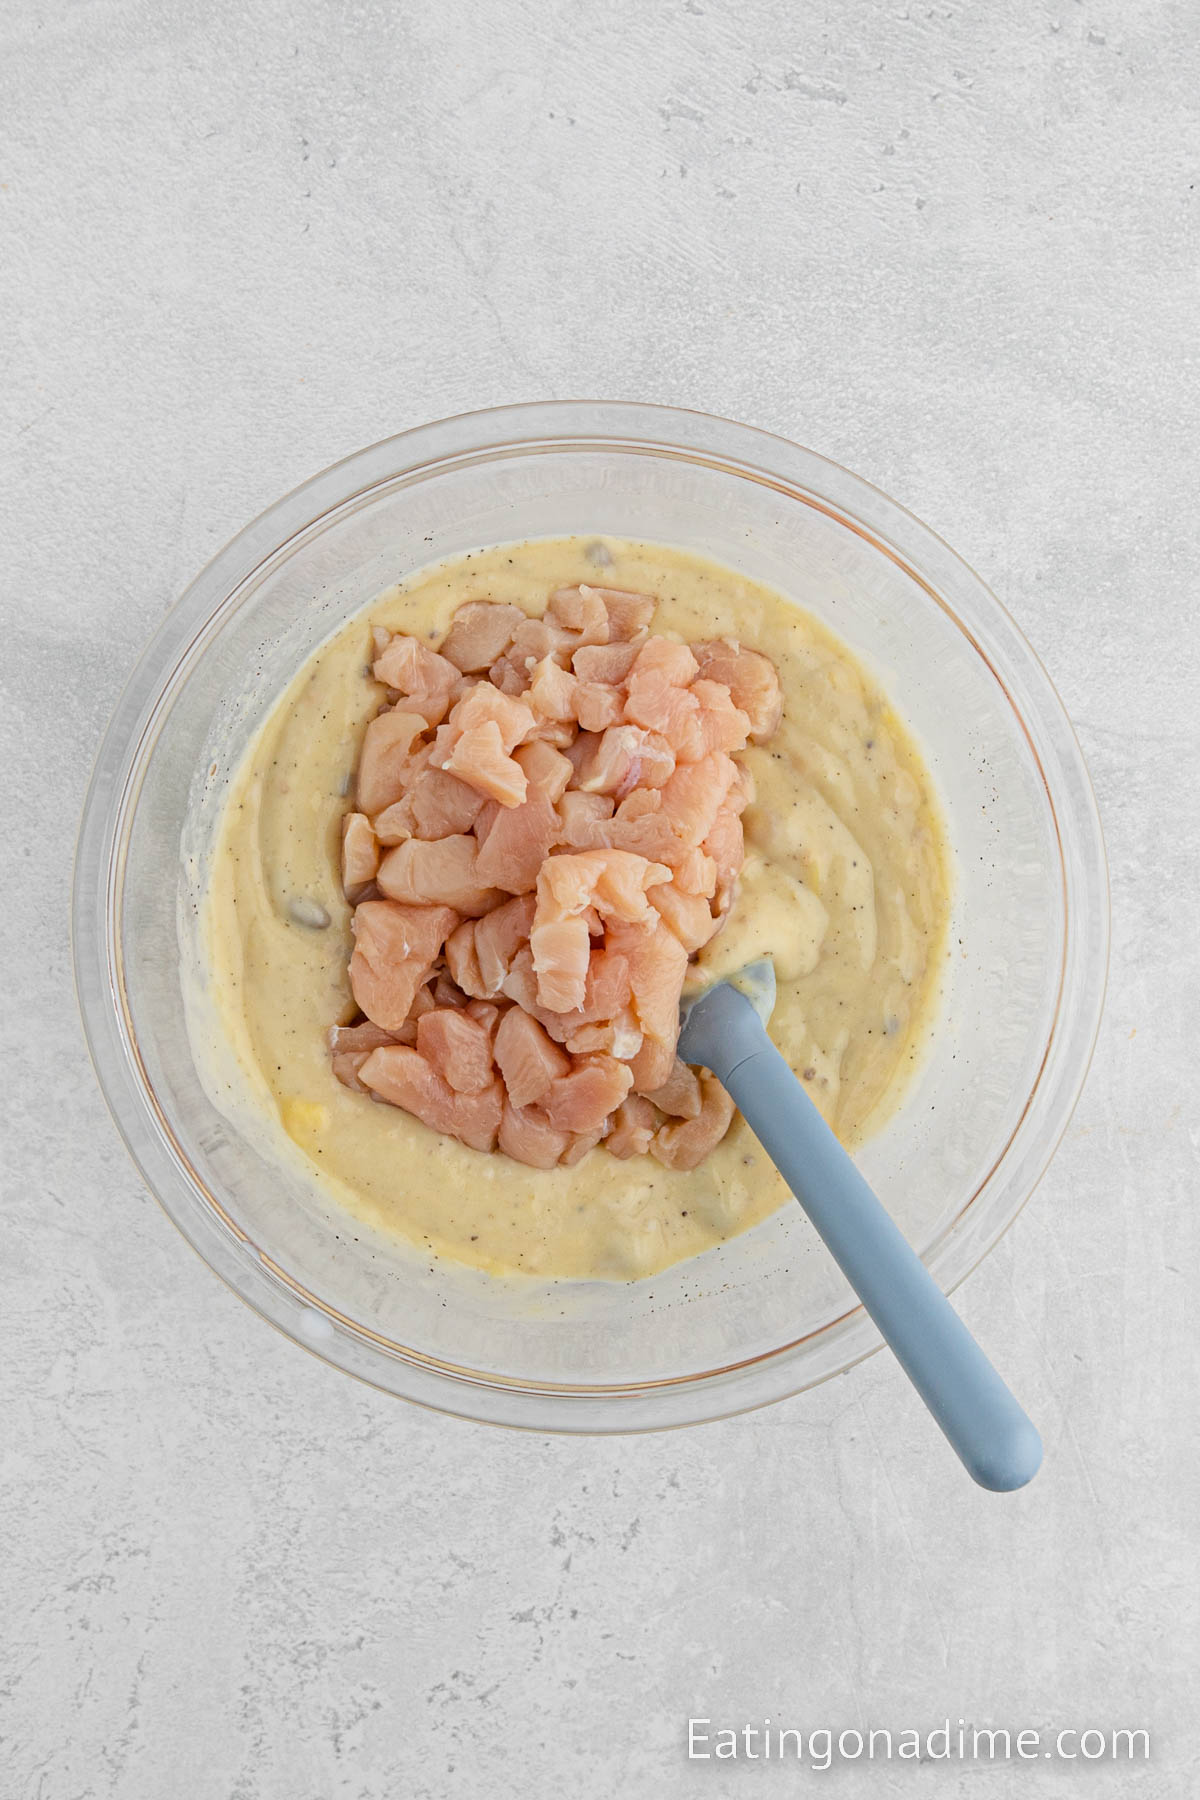 Mixing in diced uncooked chicken in the cream of soup mixture in a bowl